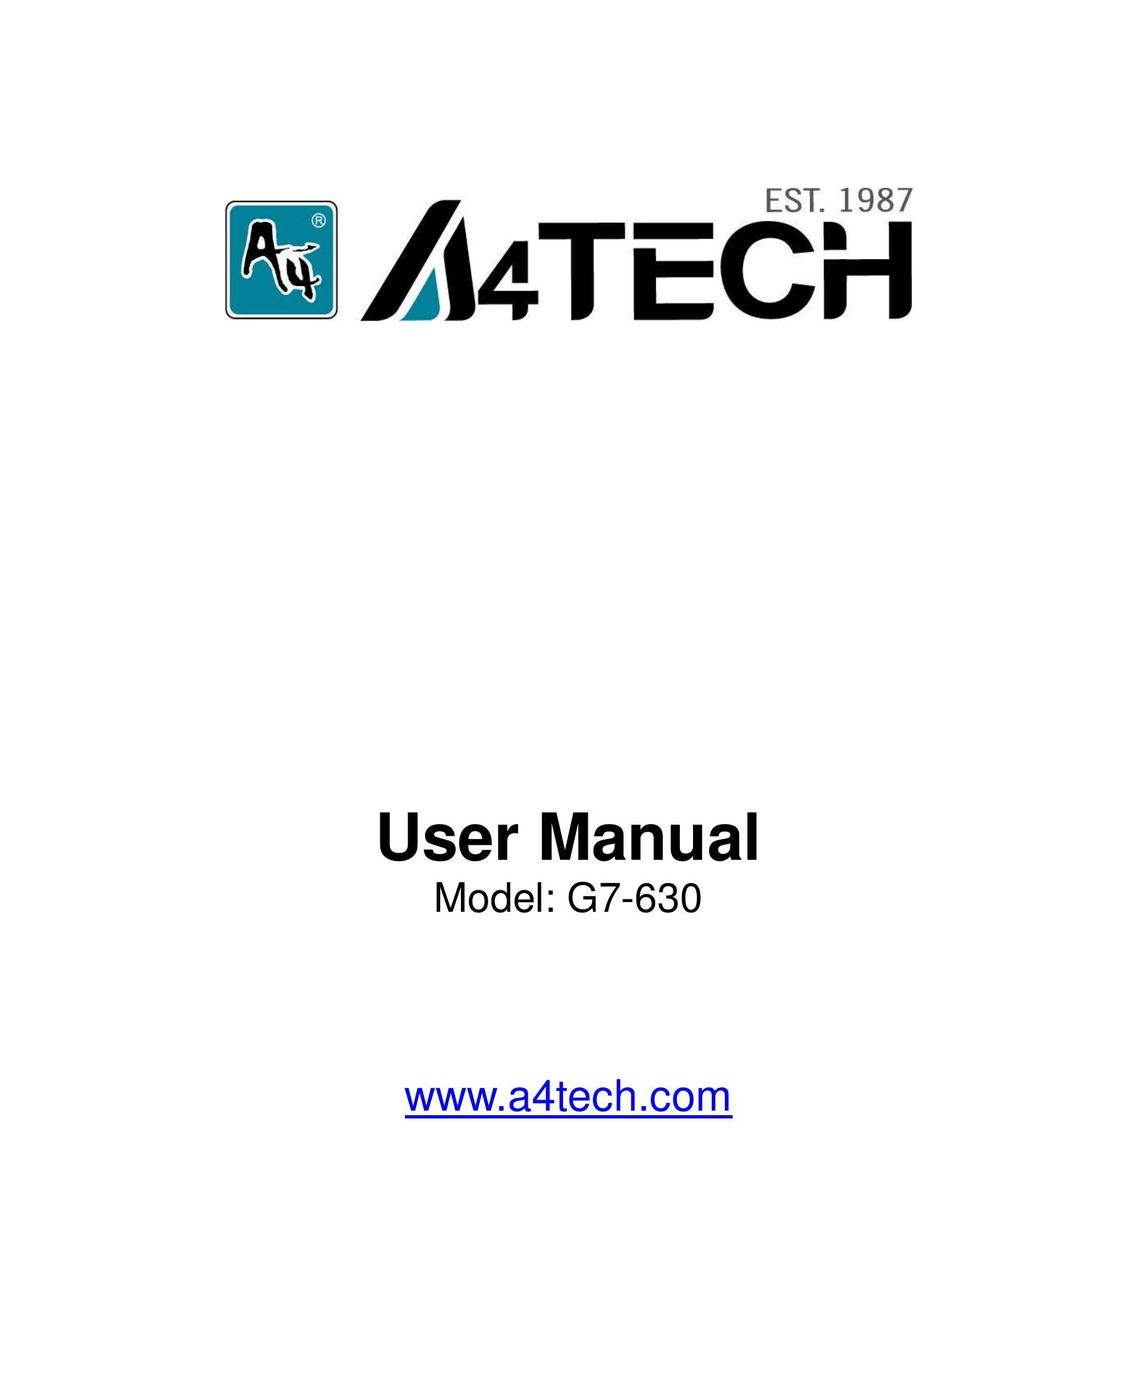 A4 Tech. G7-630 Mouse User Manual (Page 1)